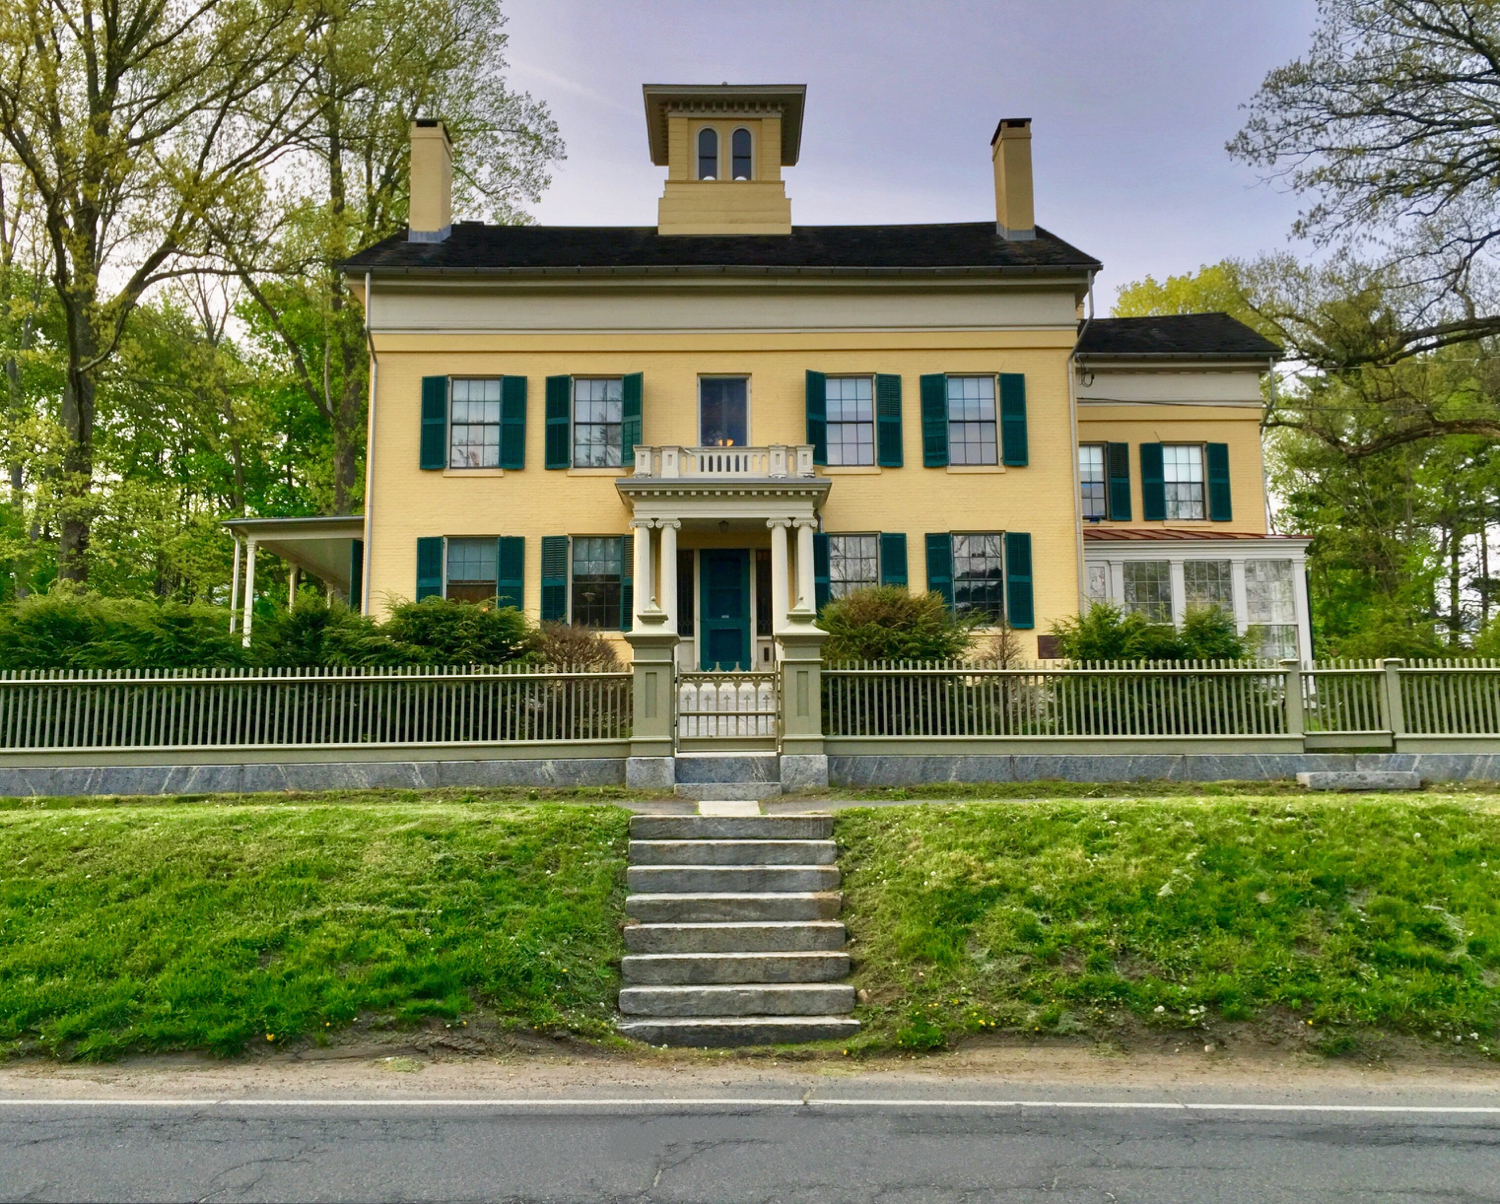 Emily Dickinson's house — copyright Trace Meek